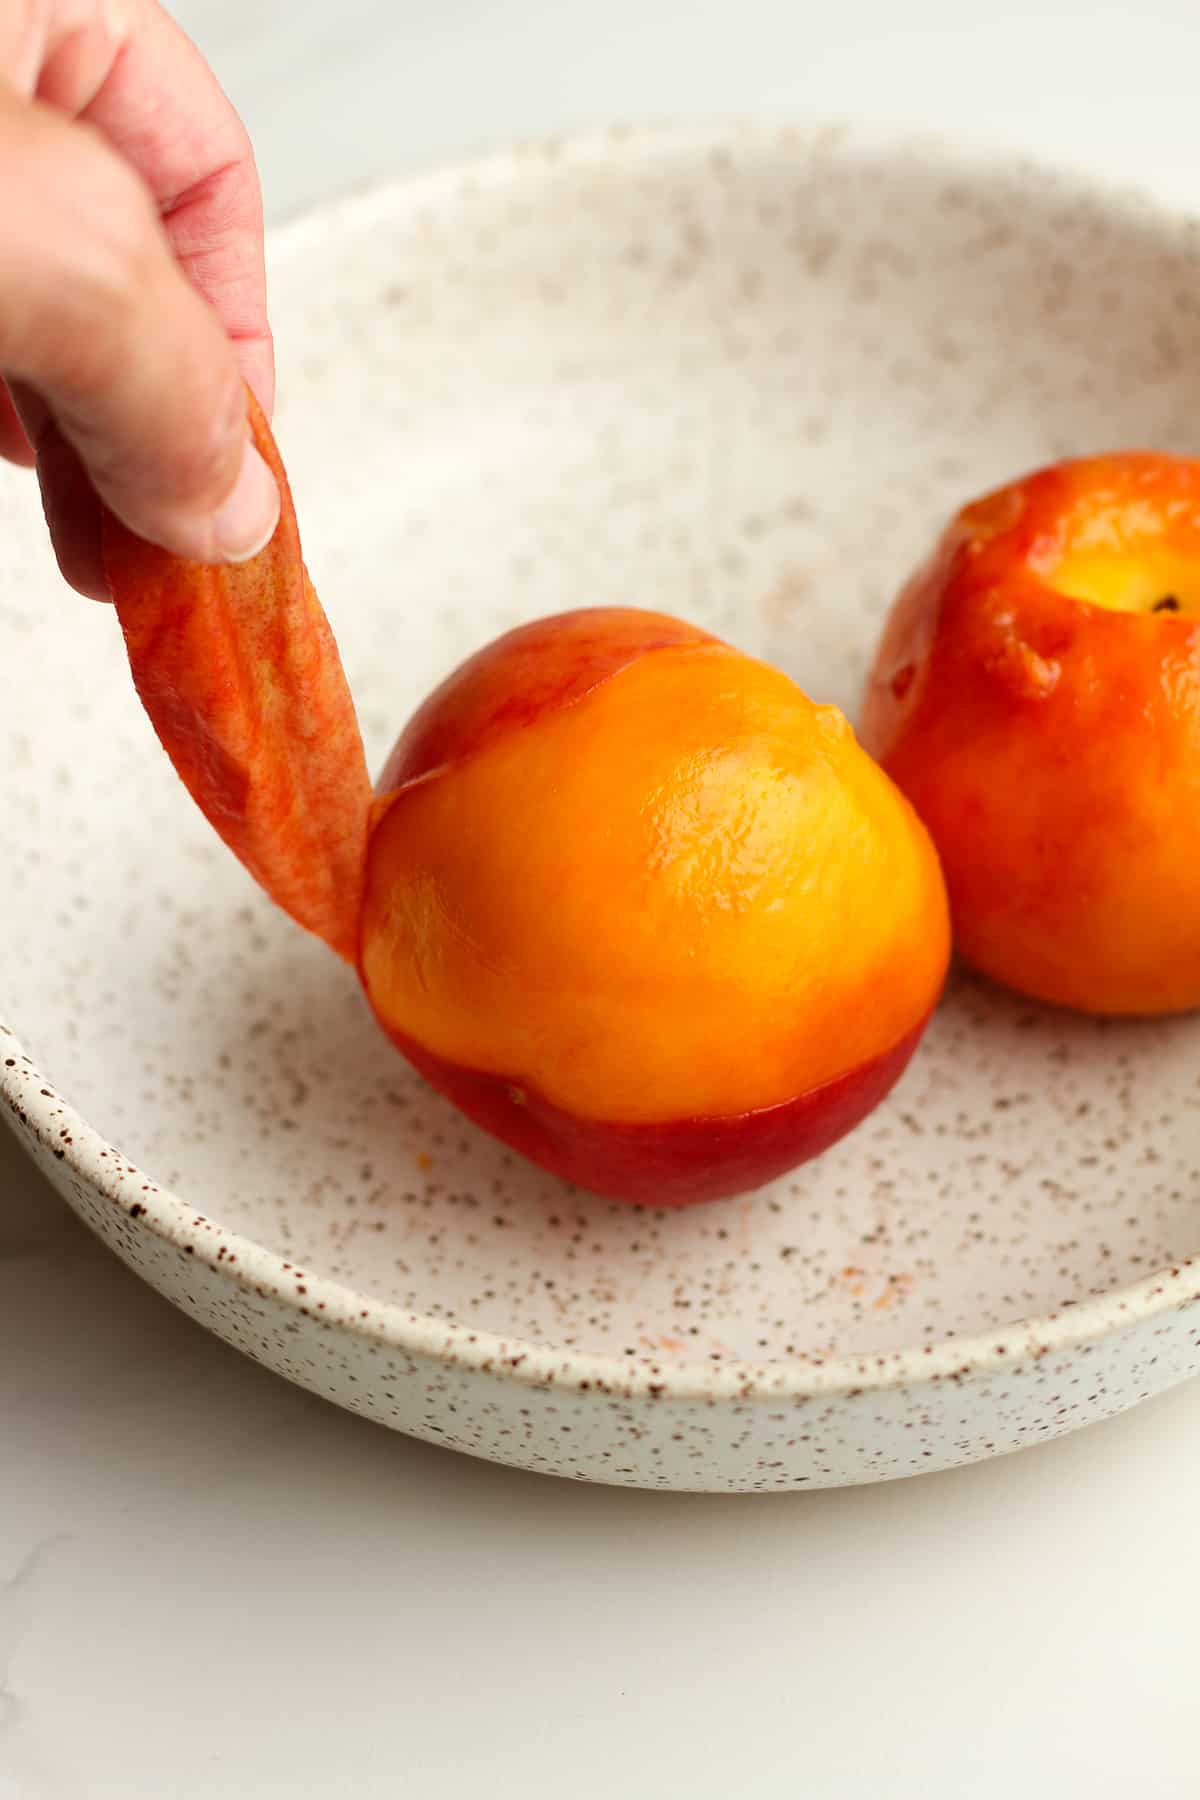 A hand pulling the skin off of a peach.